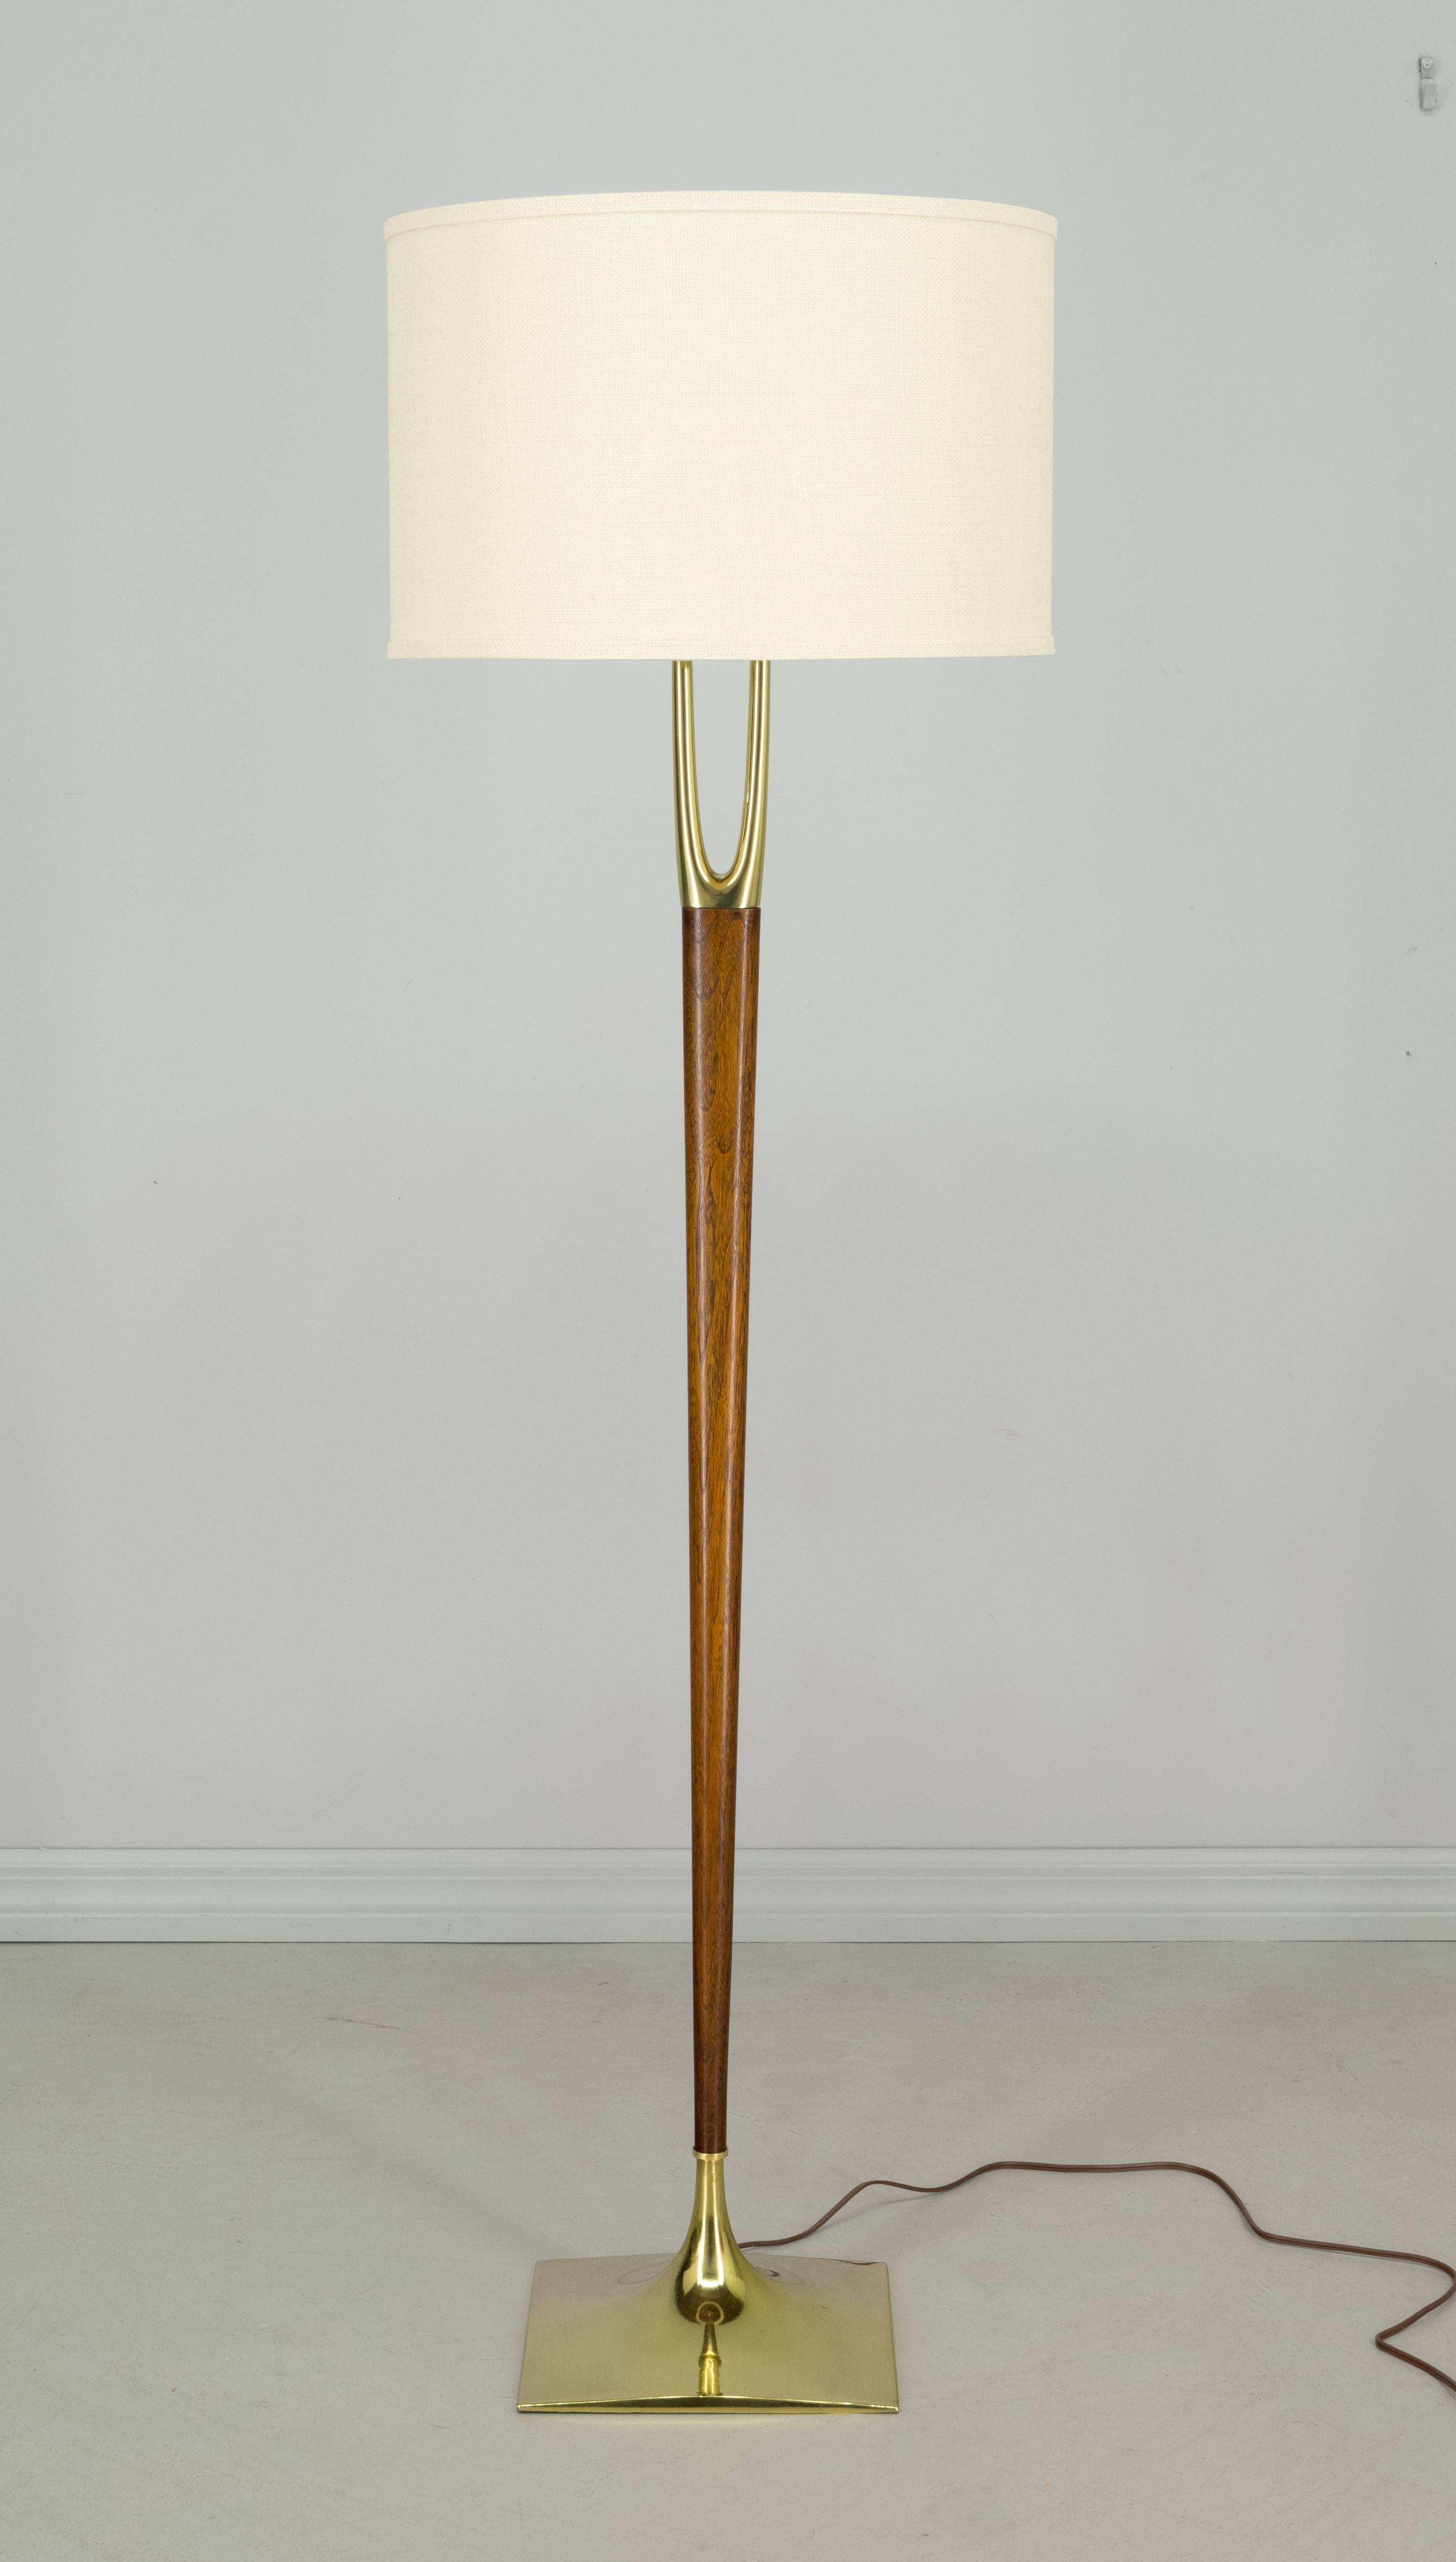 Iconic, sought after Mid-Century Modern floor lamp designed by Gerald Thurston and made by the Laurel Lamp Company. Solid walnut center post with beautiful wood grain. Brass-plated wishbone shaped prong at top and a brass-plated base. Rewired with